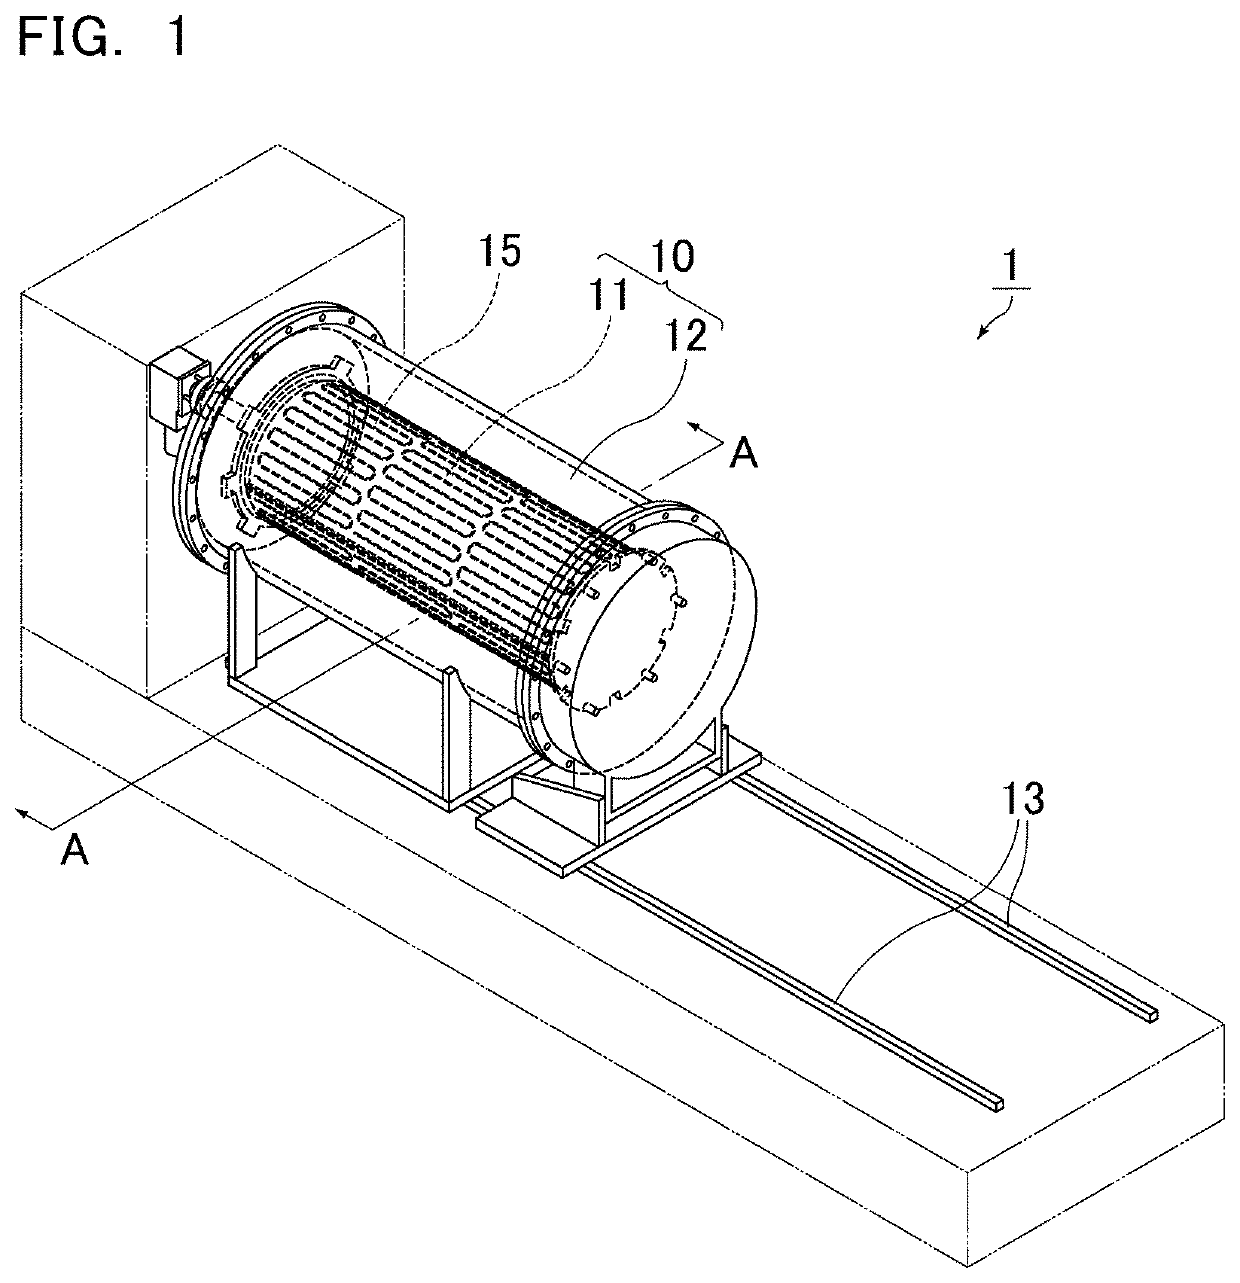 Film-forming device